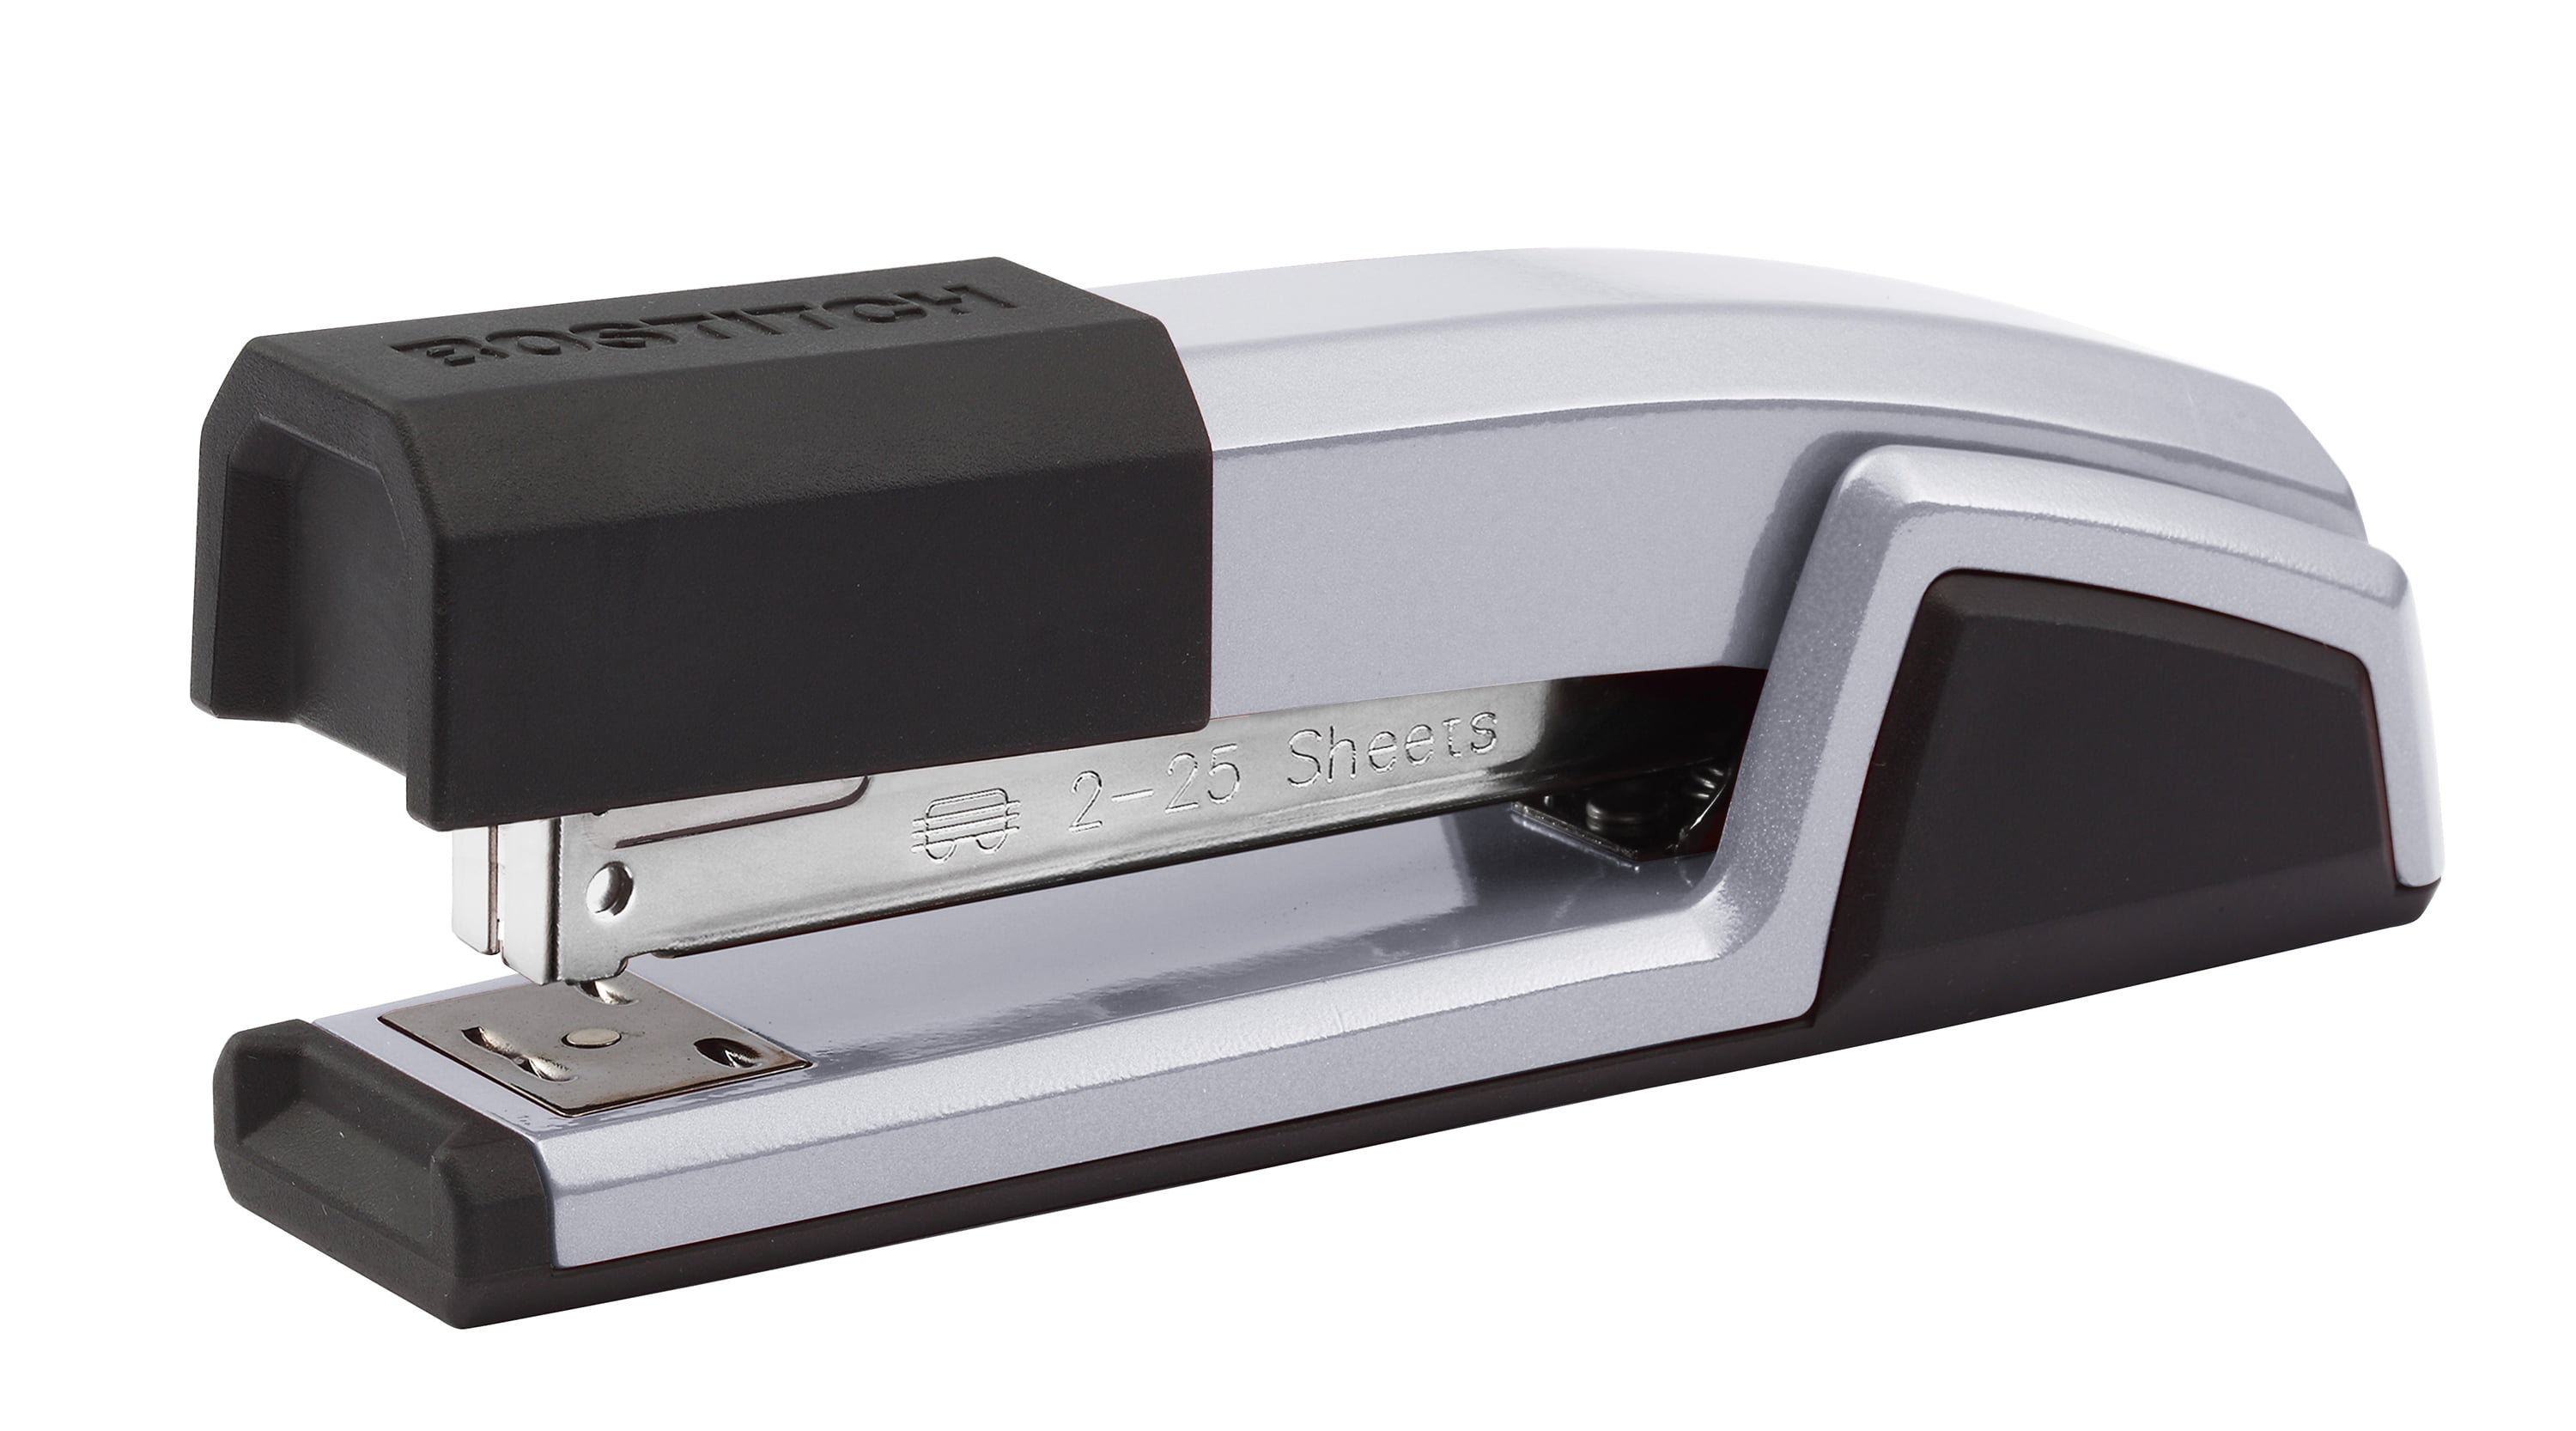 Bostitch Epic All Metal 3 in 1 Stapler with Integrated Remover & Staple Storage, Silver